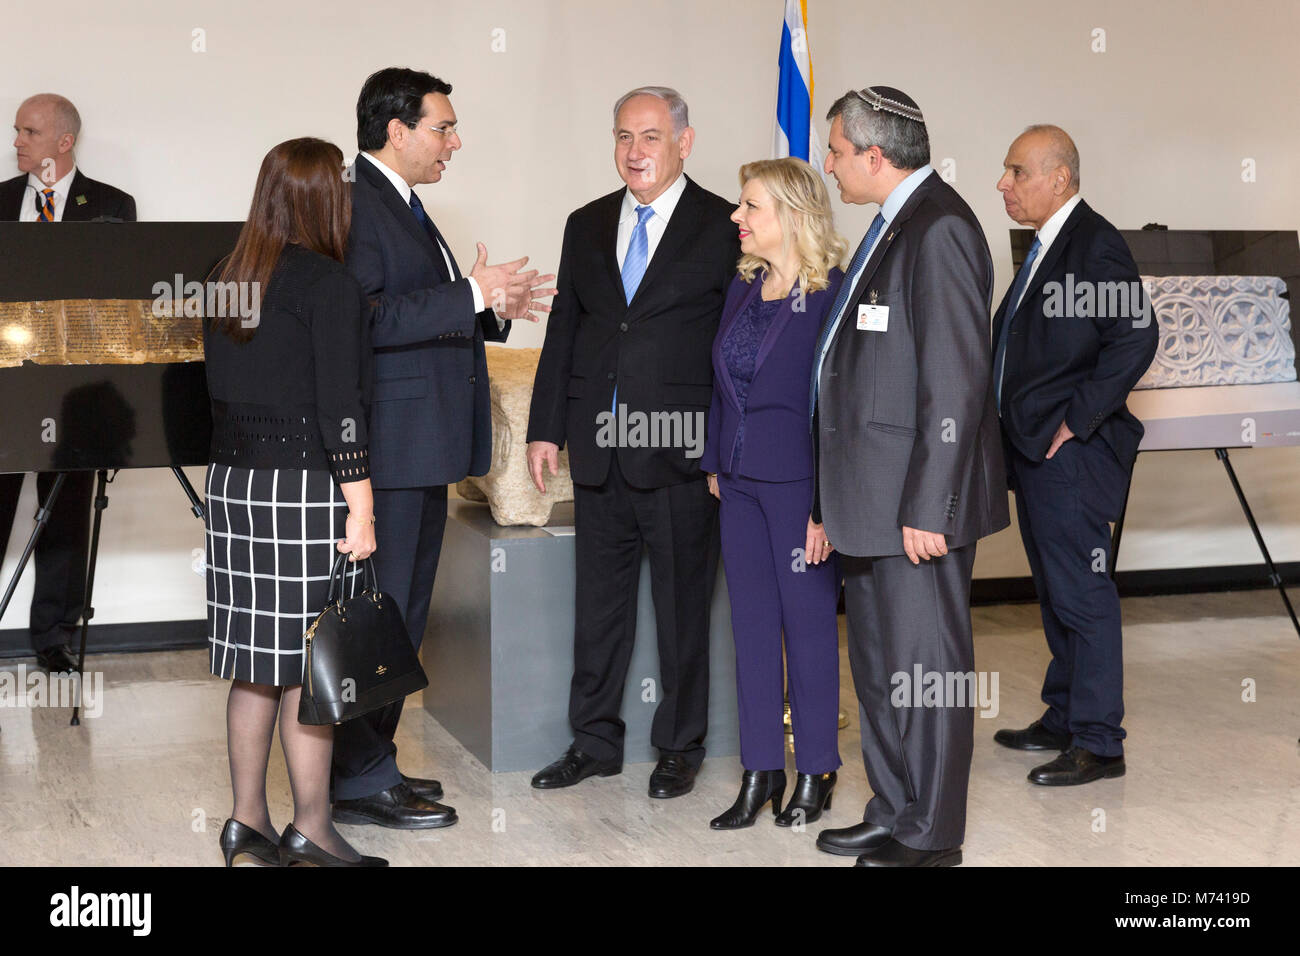 (180308) -- UNITED NATIONS, March 8, 2018 (Xinhua) -- Israeli Prime Minister Benjamin Netanyahu (4th, R) attends the exhibition '3000 years of history: Jews in Jerusalem' at the United Nations headquarters in New York, March 8, 2018. (Xinhua/Li Muzi) Stock Photo